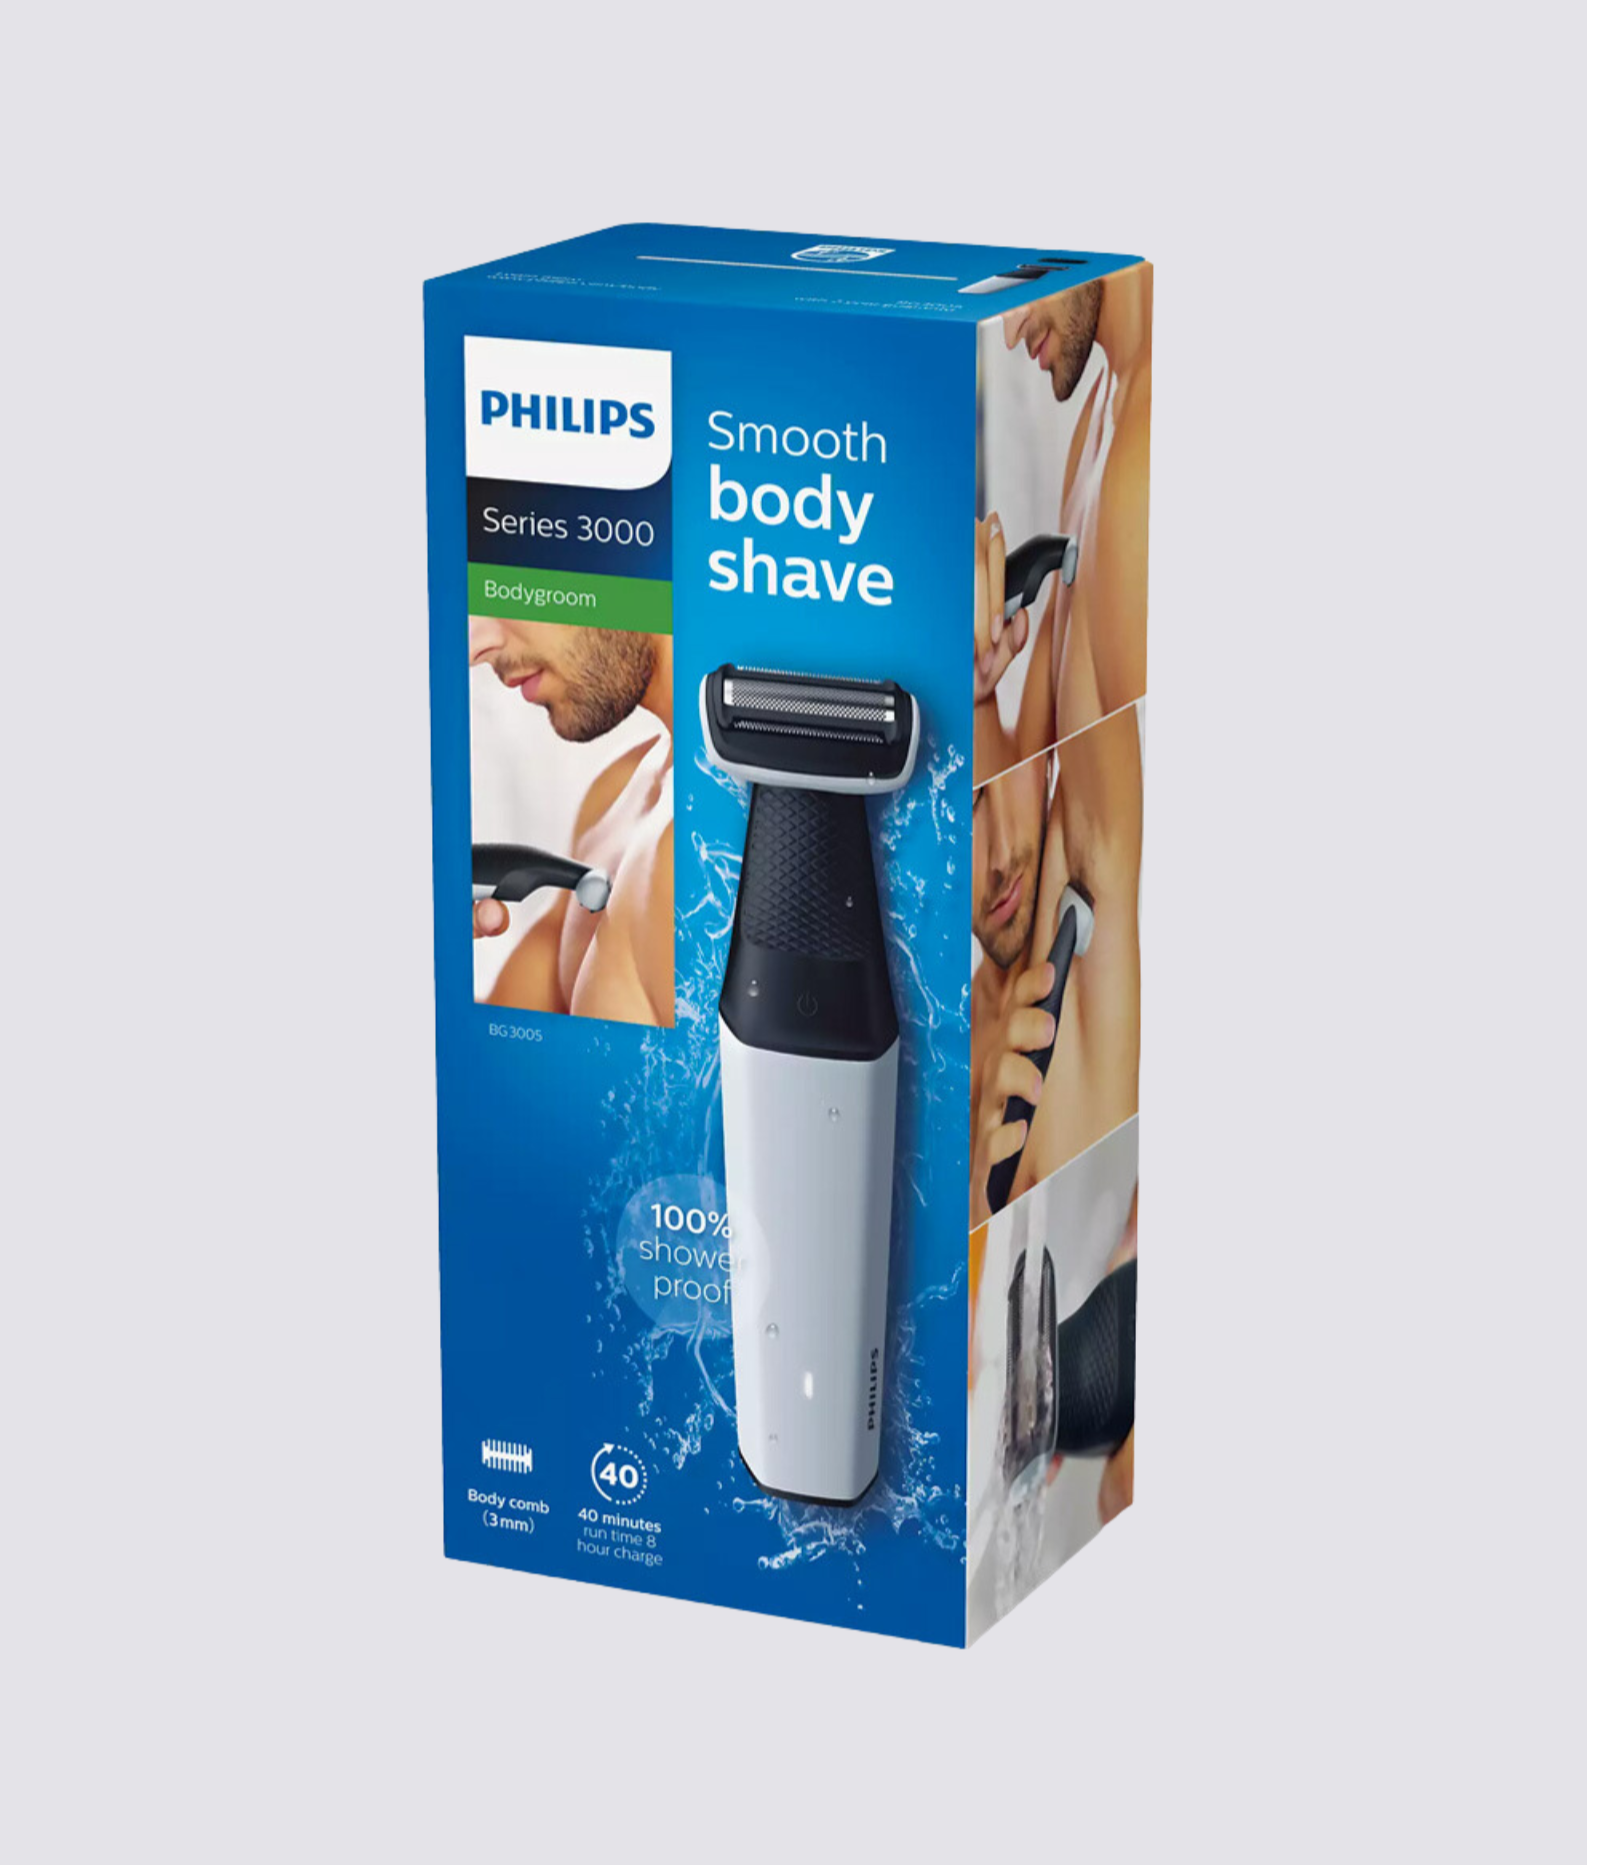 Buy Philips BG3005/15 Cordless Showerproof Body Groomer for Men with foil  Shaver, Safe for All Body Areas, Body Private Part Shaving Online at Best  Prices in India - JioMart.